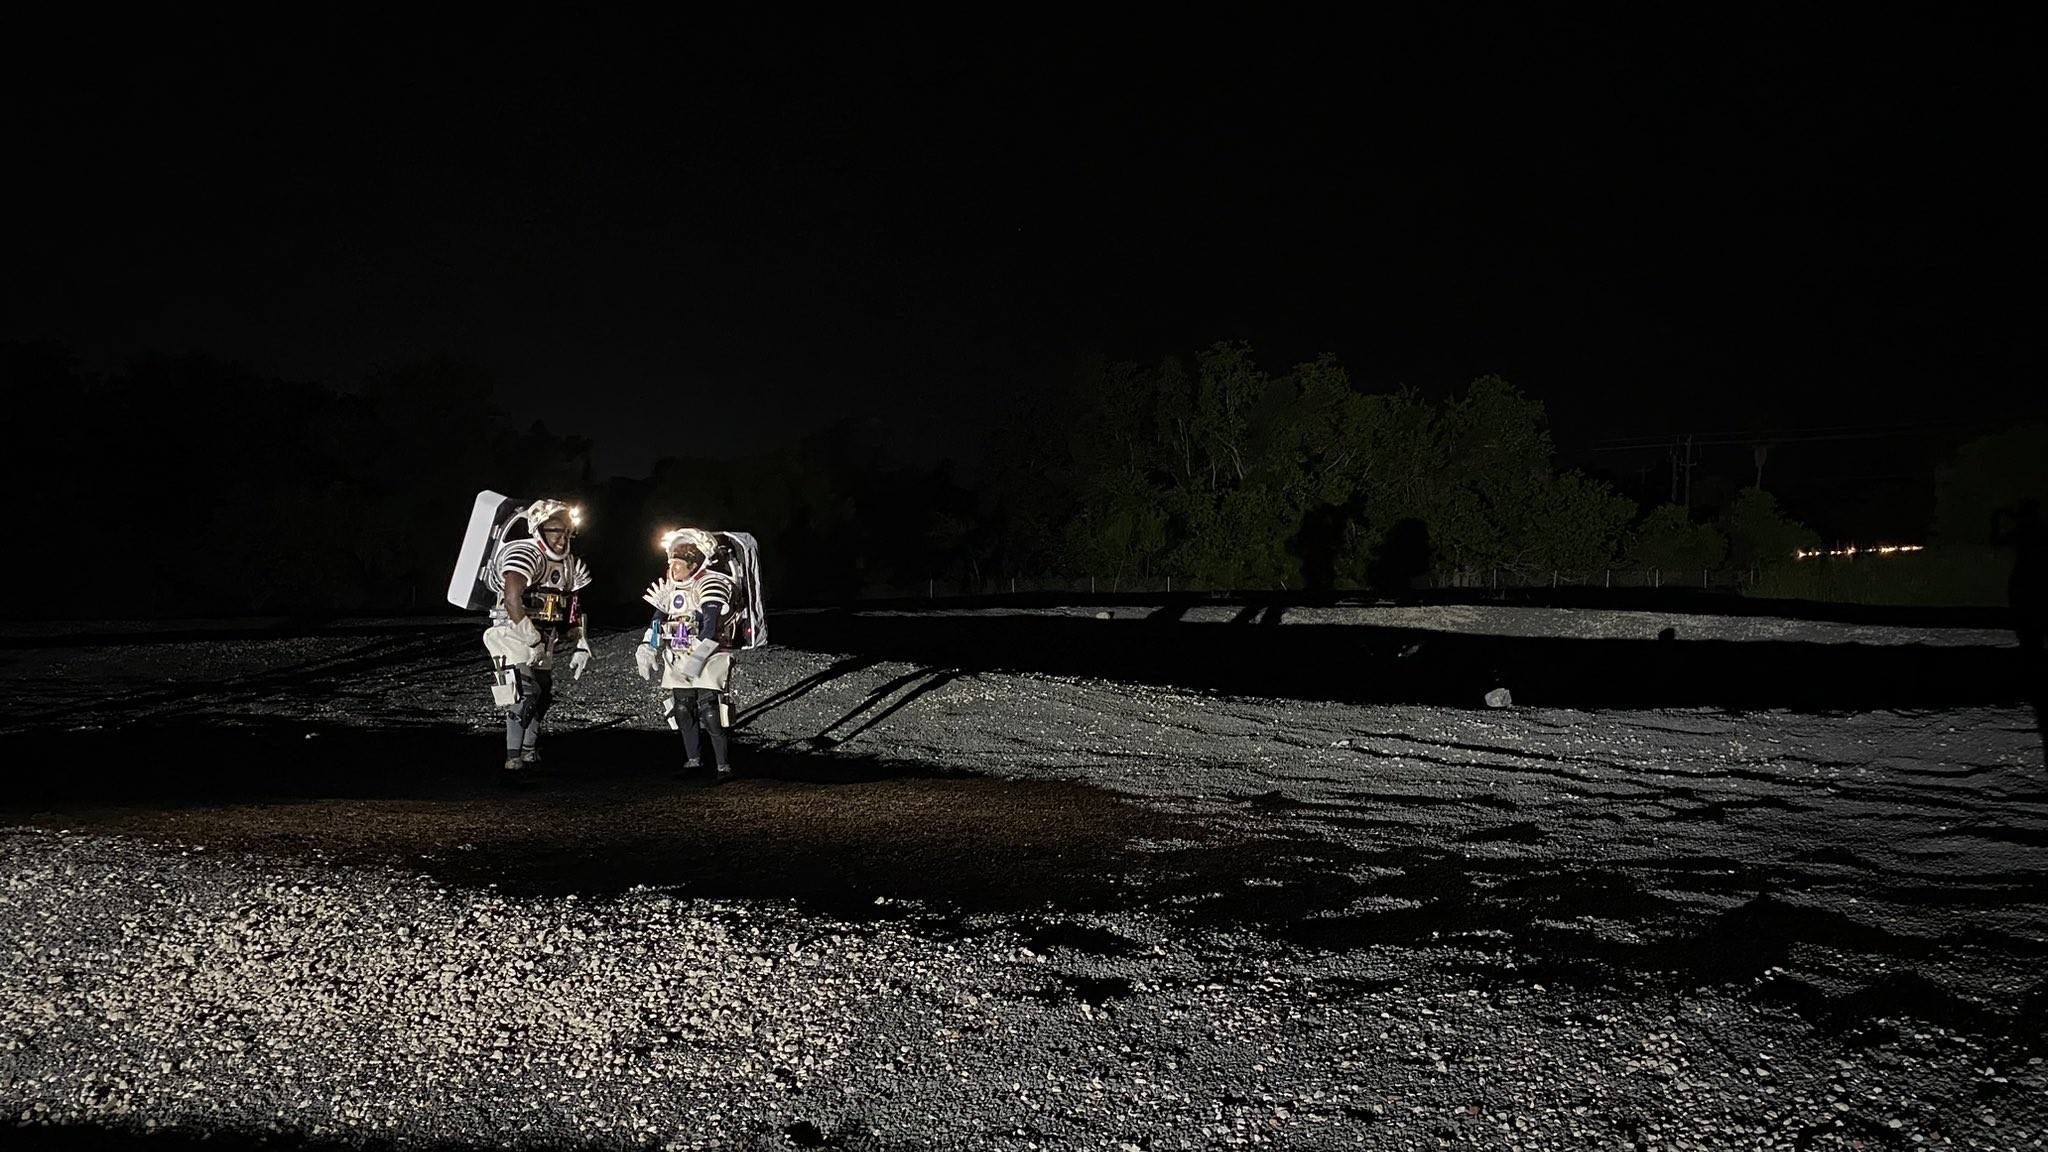 NASA astronaut walks on the ‘moon’ to get ready for Artemis landings (photos) Space